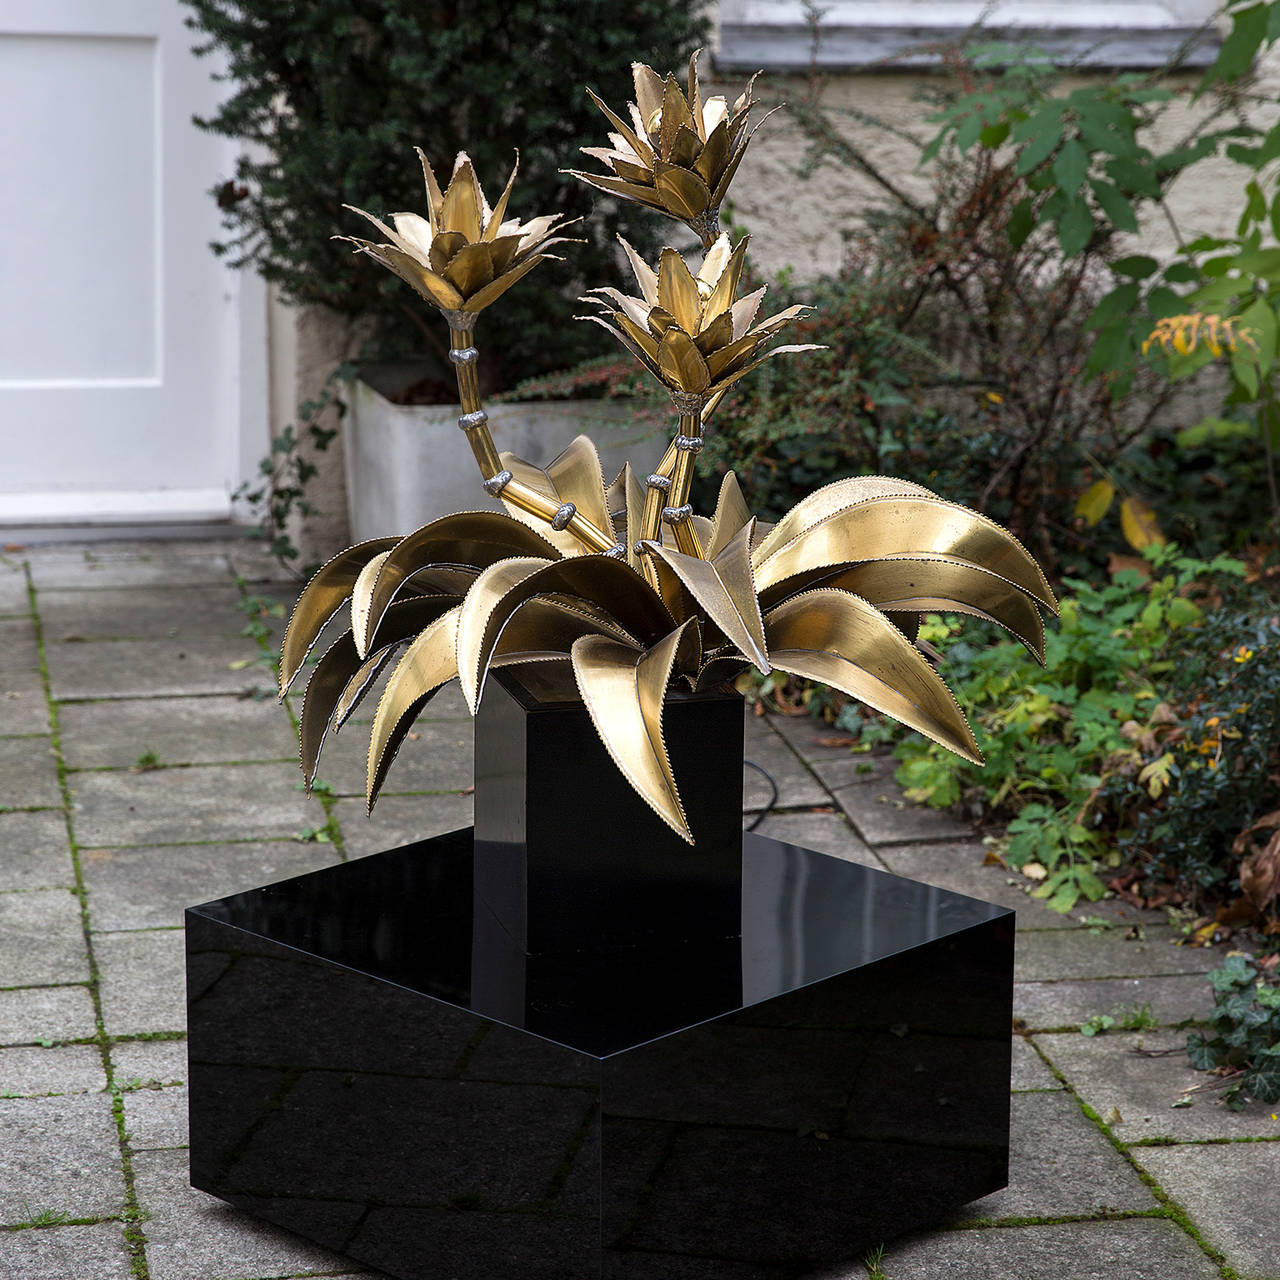 Elegant palm flower lamp by Maison Jansen attributed, very high quality lamp.